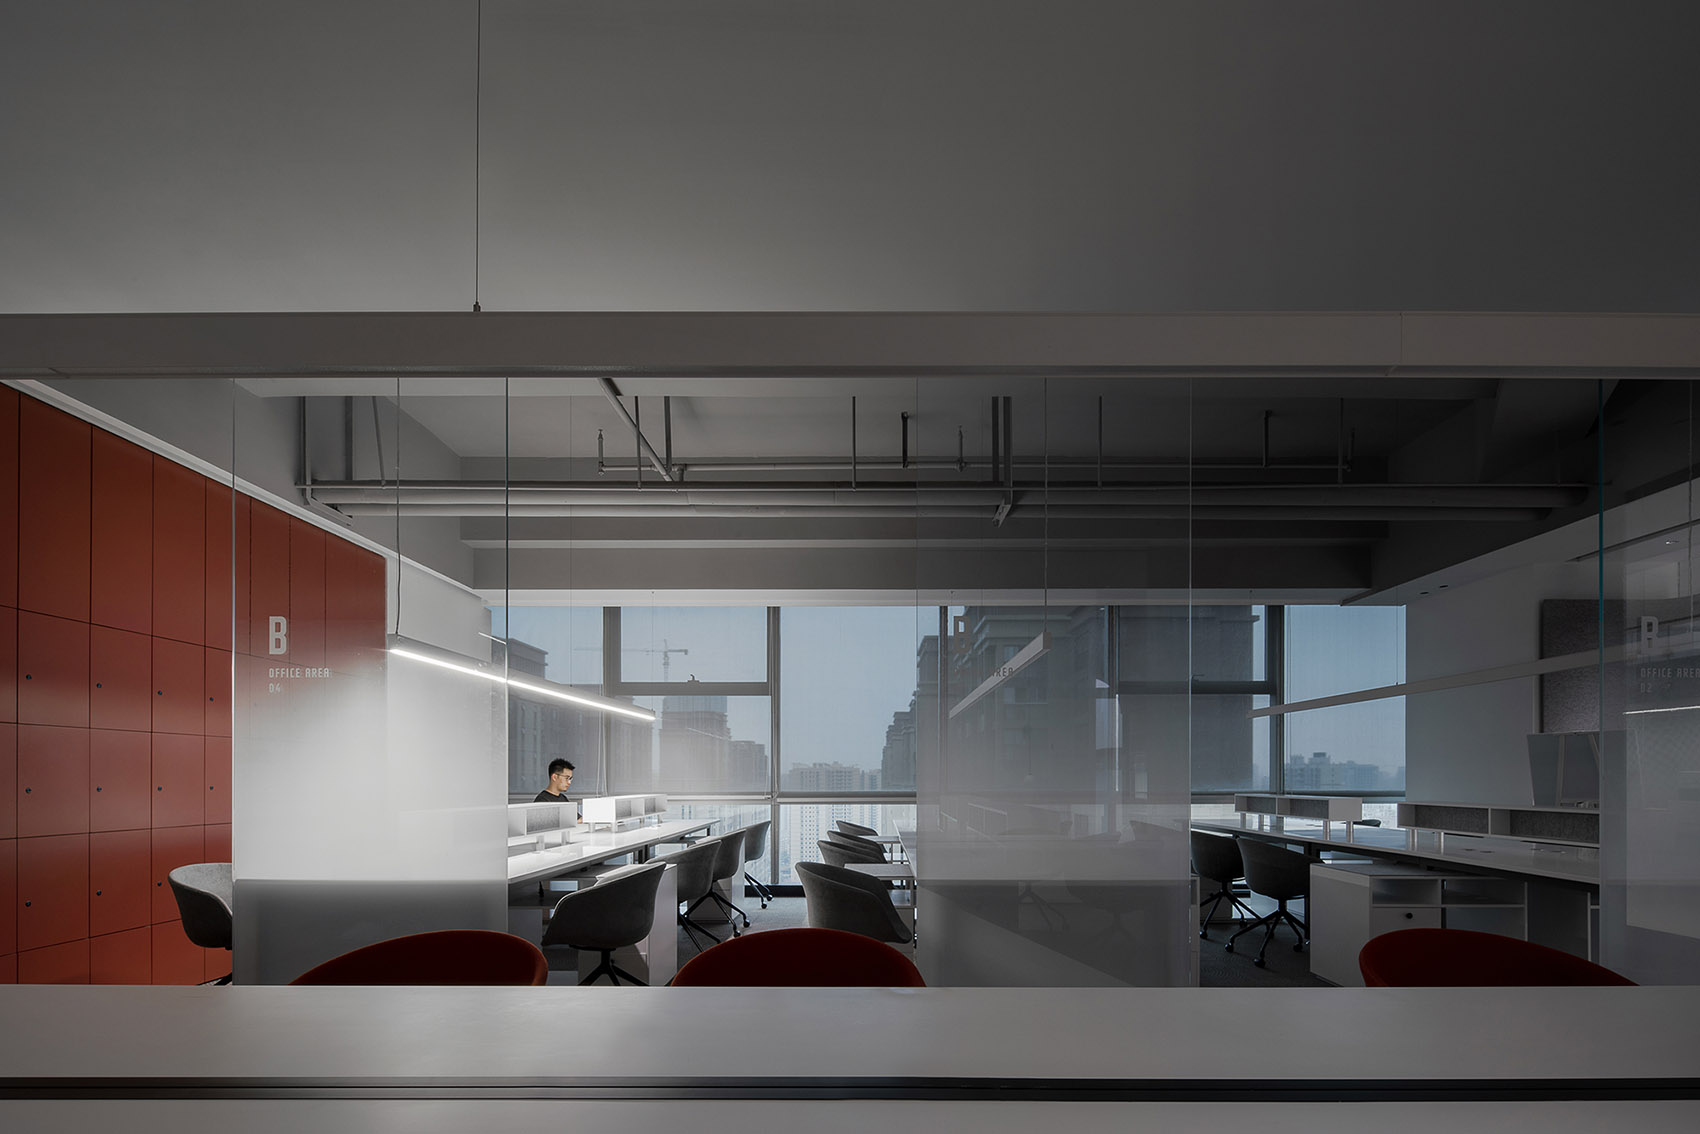 014-poly-voly-office-china-by-zs-design.jpg